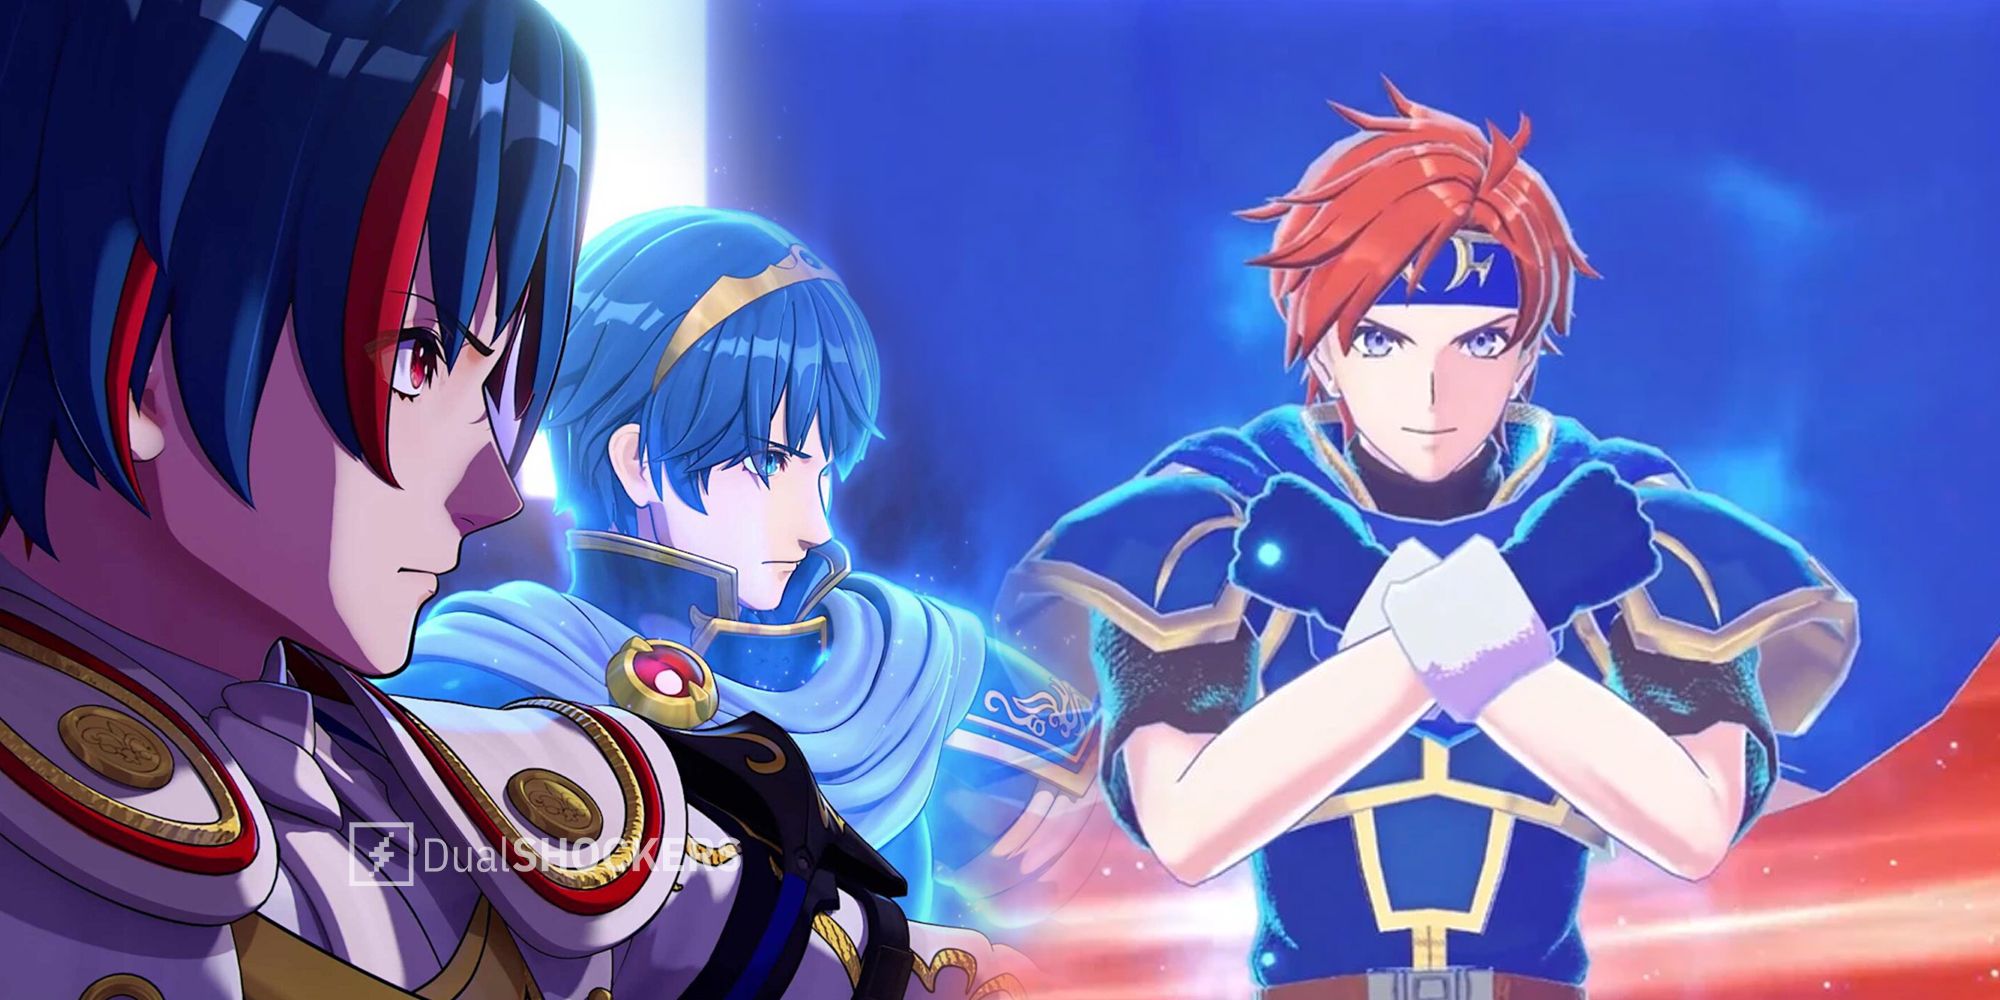 Fire Emblem Engage Pair-Up and emblem rings gameplay